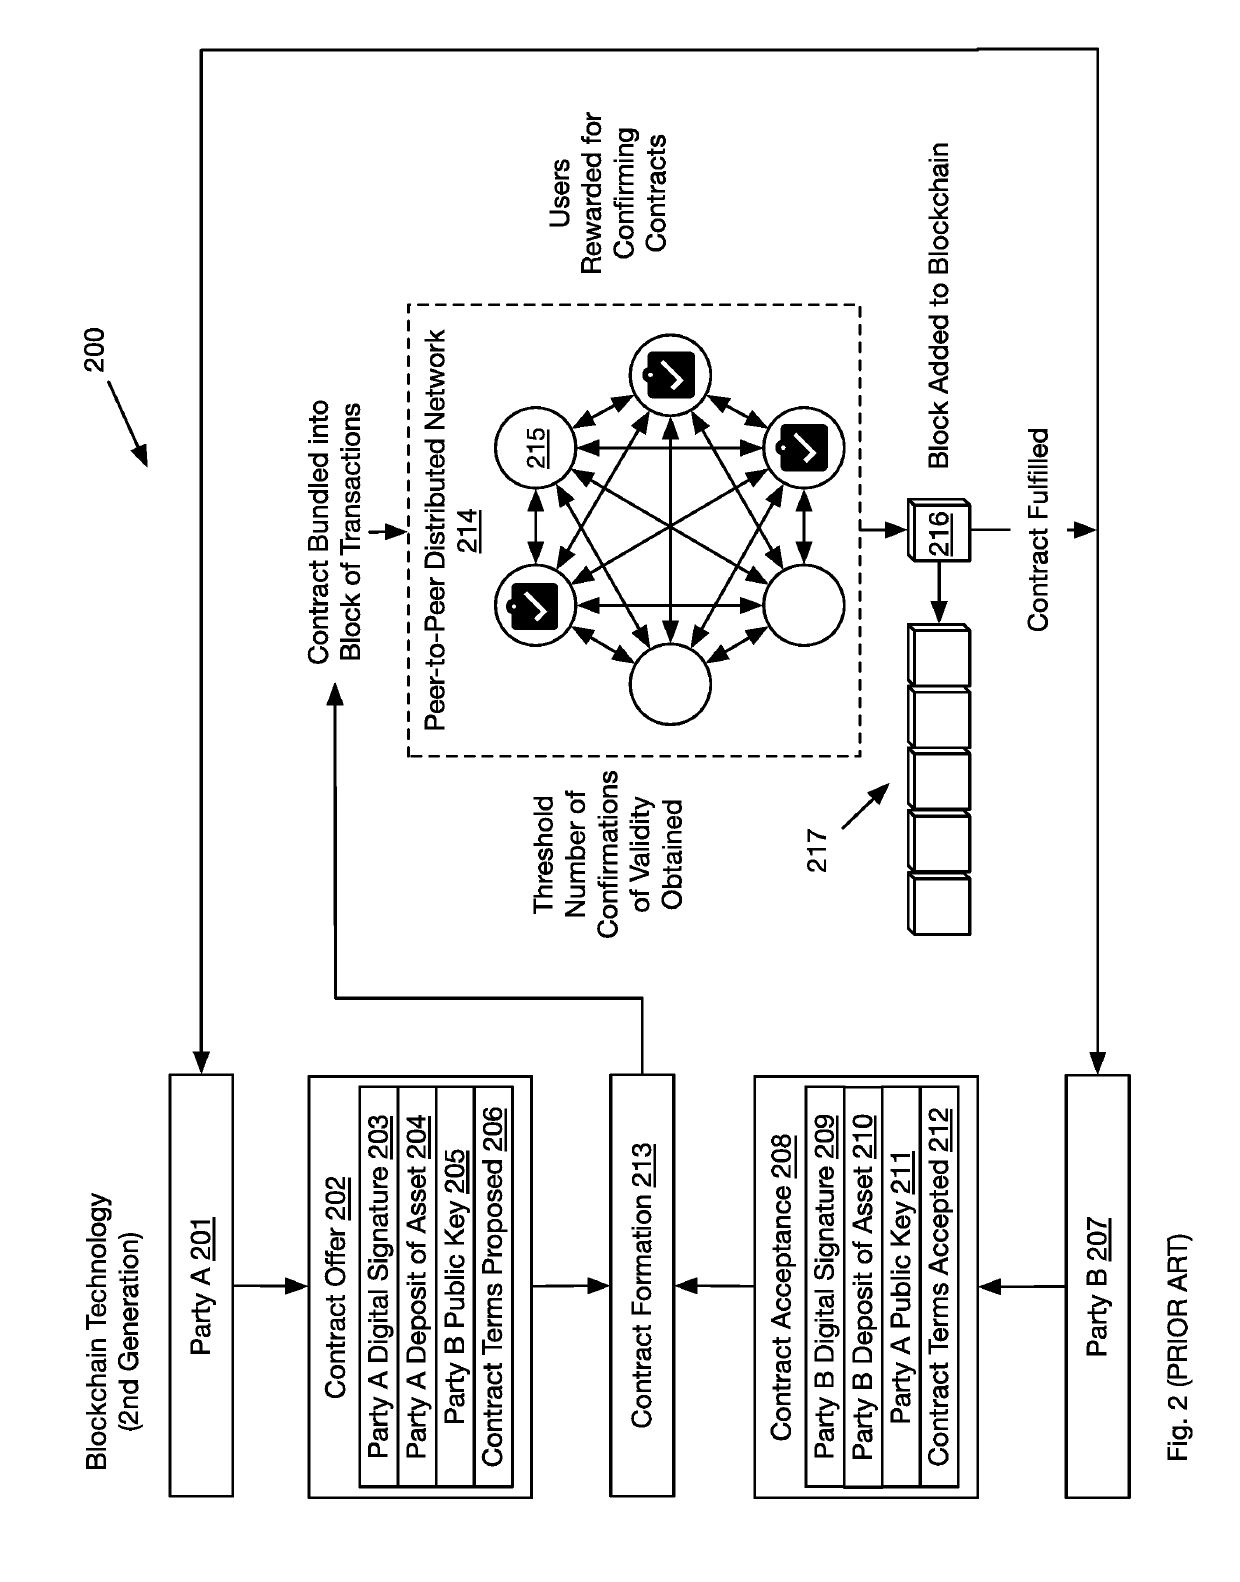 System and method for multi-tiered distributed network transactional database